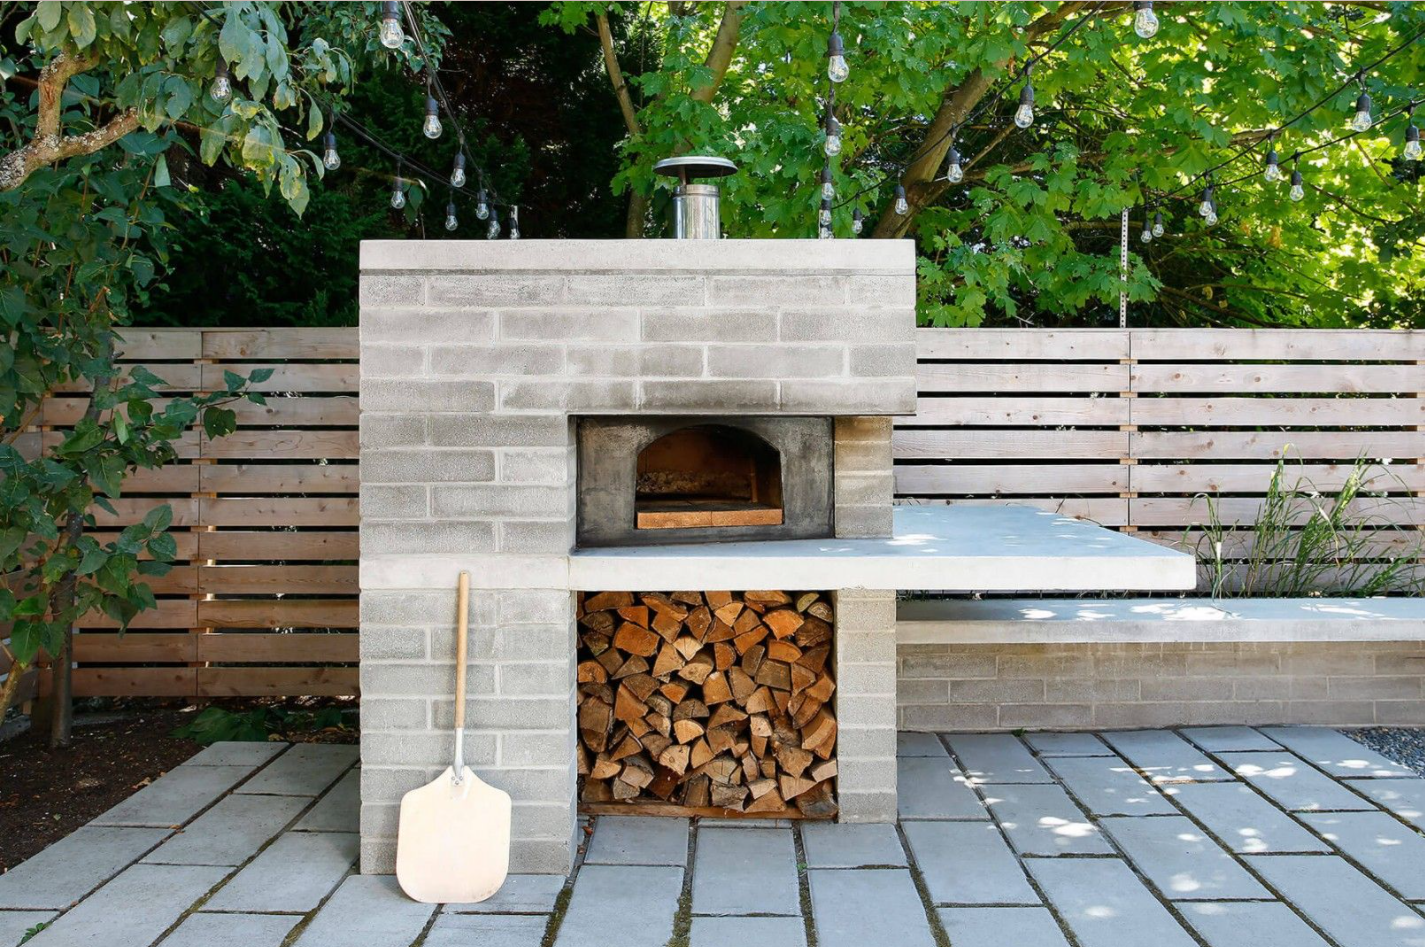 How Long Does It Take To Heat Up An Outdoor Pizza Oven